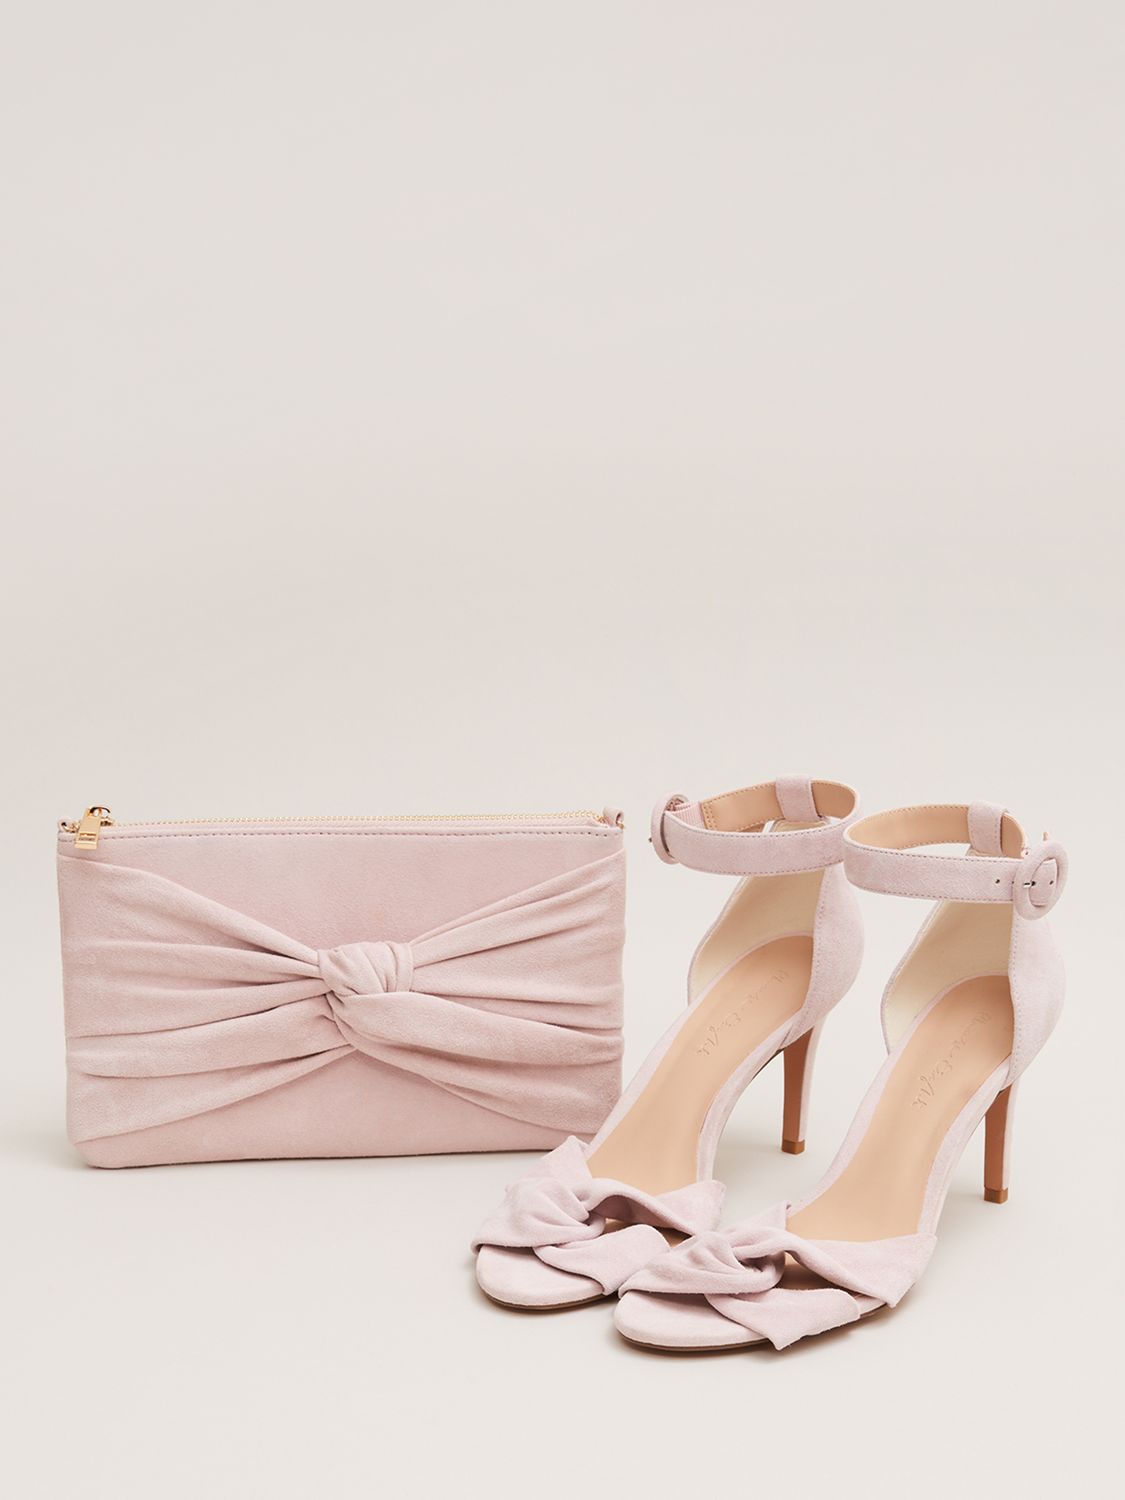 Phase Eight Suede Knot Front Clutch, Pale Pink, One Size